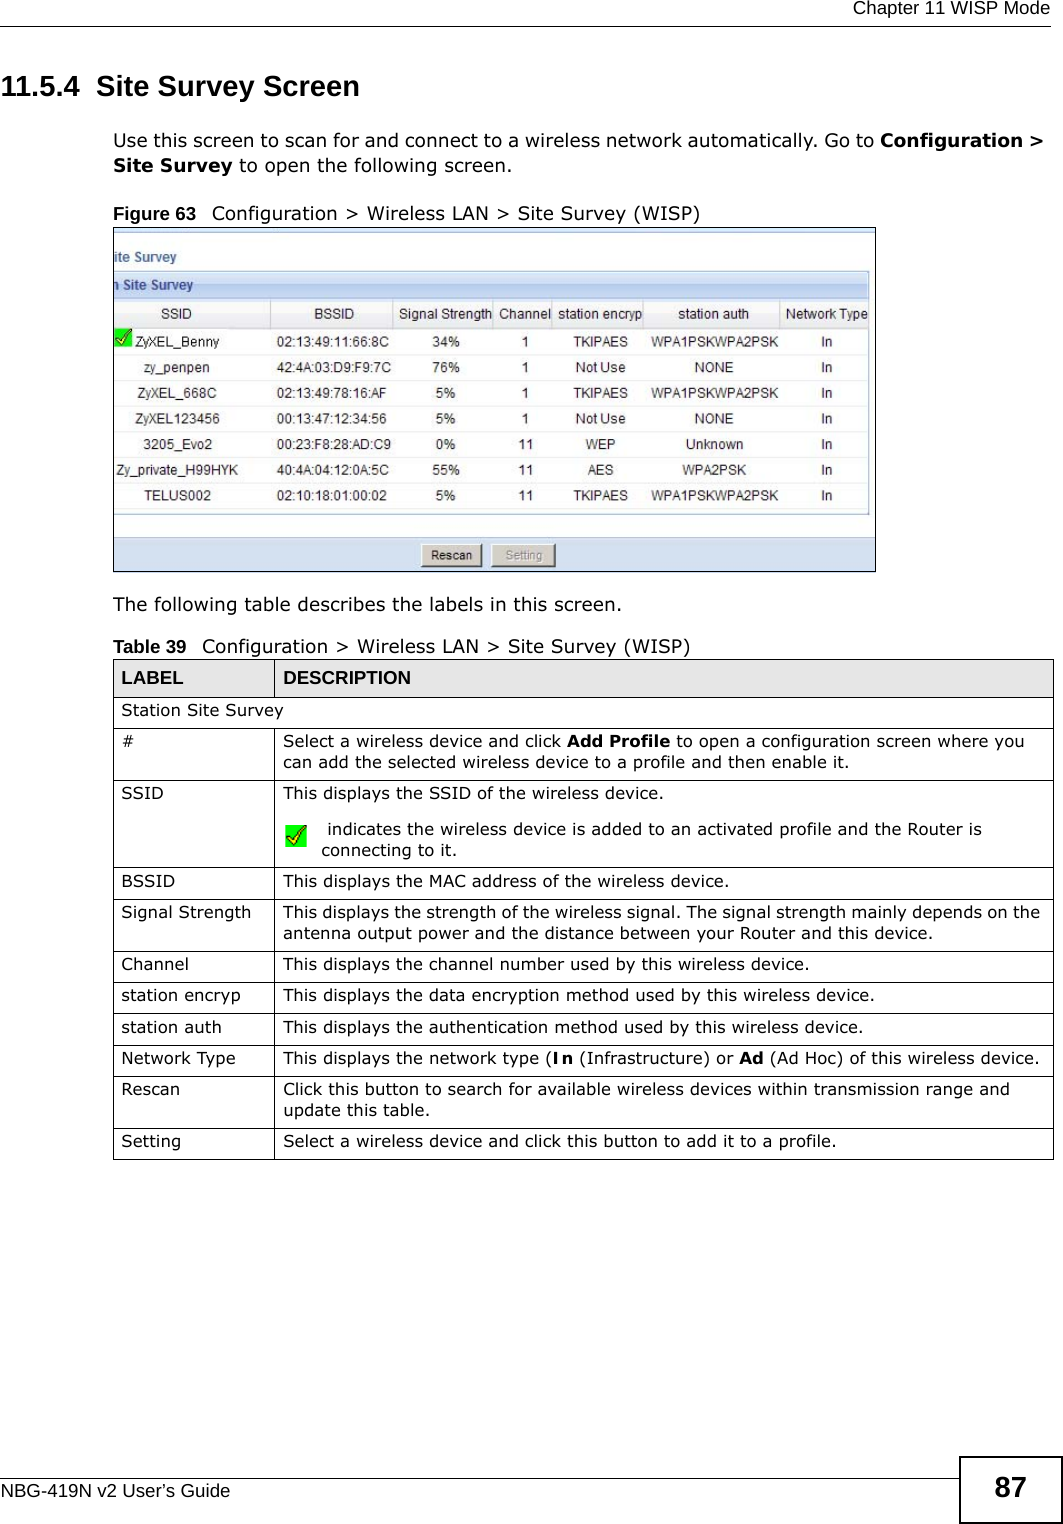  Chapter 11 WISP ModeNBG-419N v2 User’s Guide 8711.5.4  Site Survey ScreenUse this screen to scan for and connect to a wireless network automatically. Go to Configuration &gt; Site Survey to open the following screen.Figure 63   Configuration &gt; Wireless LAN &gt; Site Survey (WISP)The following table describes the labels in this screen. Table 39   Configuration &gt; Wireless LAN &gt; Site Survey (WISP)LABEL  DESCRIPTIONStation Site Survey# Select a wireless device and click Add Profile to open a configuration screen where you can add the selected wireless device to a profile and then enable it.SSID This displays the SSID of the wireless device. indicates the wireless device is added to an activated profile and the Router is connecting to it.BSSID This displays the MAC address of the wireless device.Signal Strength This displays the strength of the wireless signal. The signal strength mainly depends on the antenna output power and the distance between your Router and this device.Channel This displays the channel number used by this wireless device. station encryp This displays the data encryption method used by this wireless device.station auth This displays the authentication method used by this wireless device.Network Type This displays the network type (In (Infrastructure) or Ad (Ad Hoc) of this wireless device.Rescan Click this button to search for available wireless devices within transmission range and update this table.Setting Select a wireless device and click this button to add it to a profile.